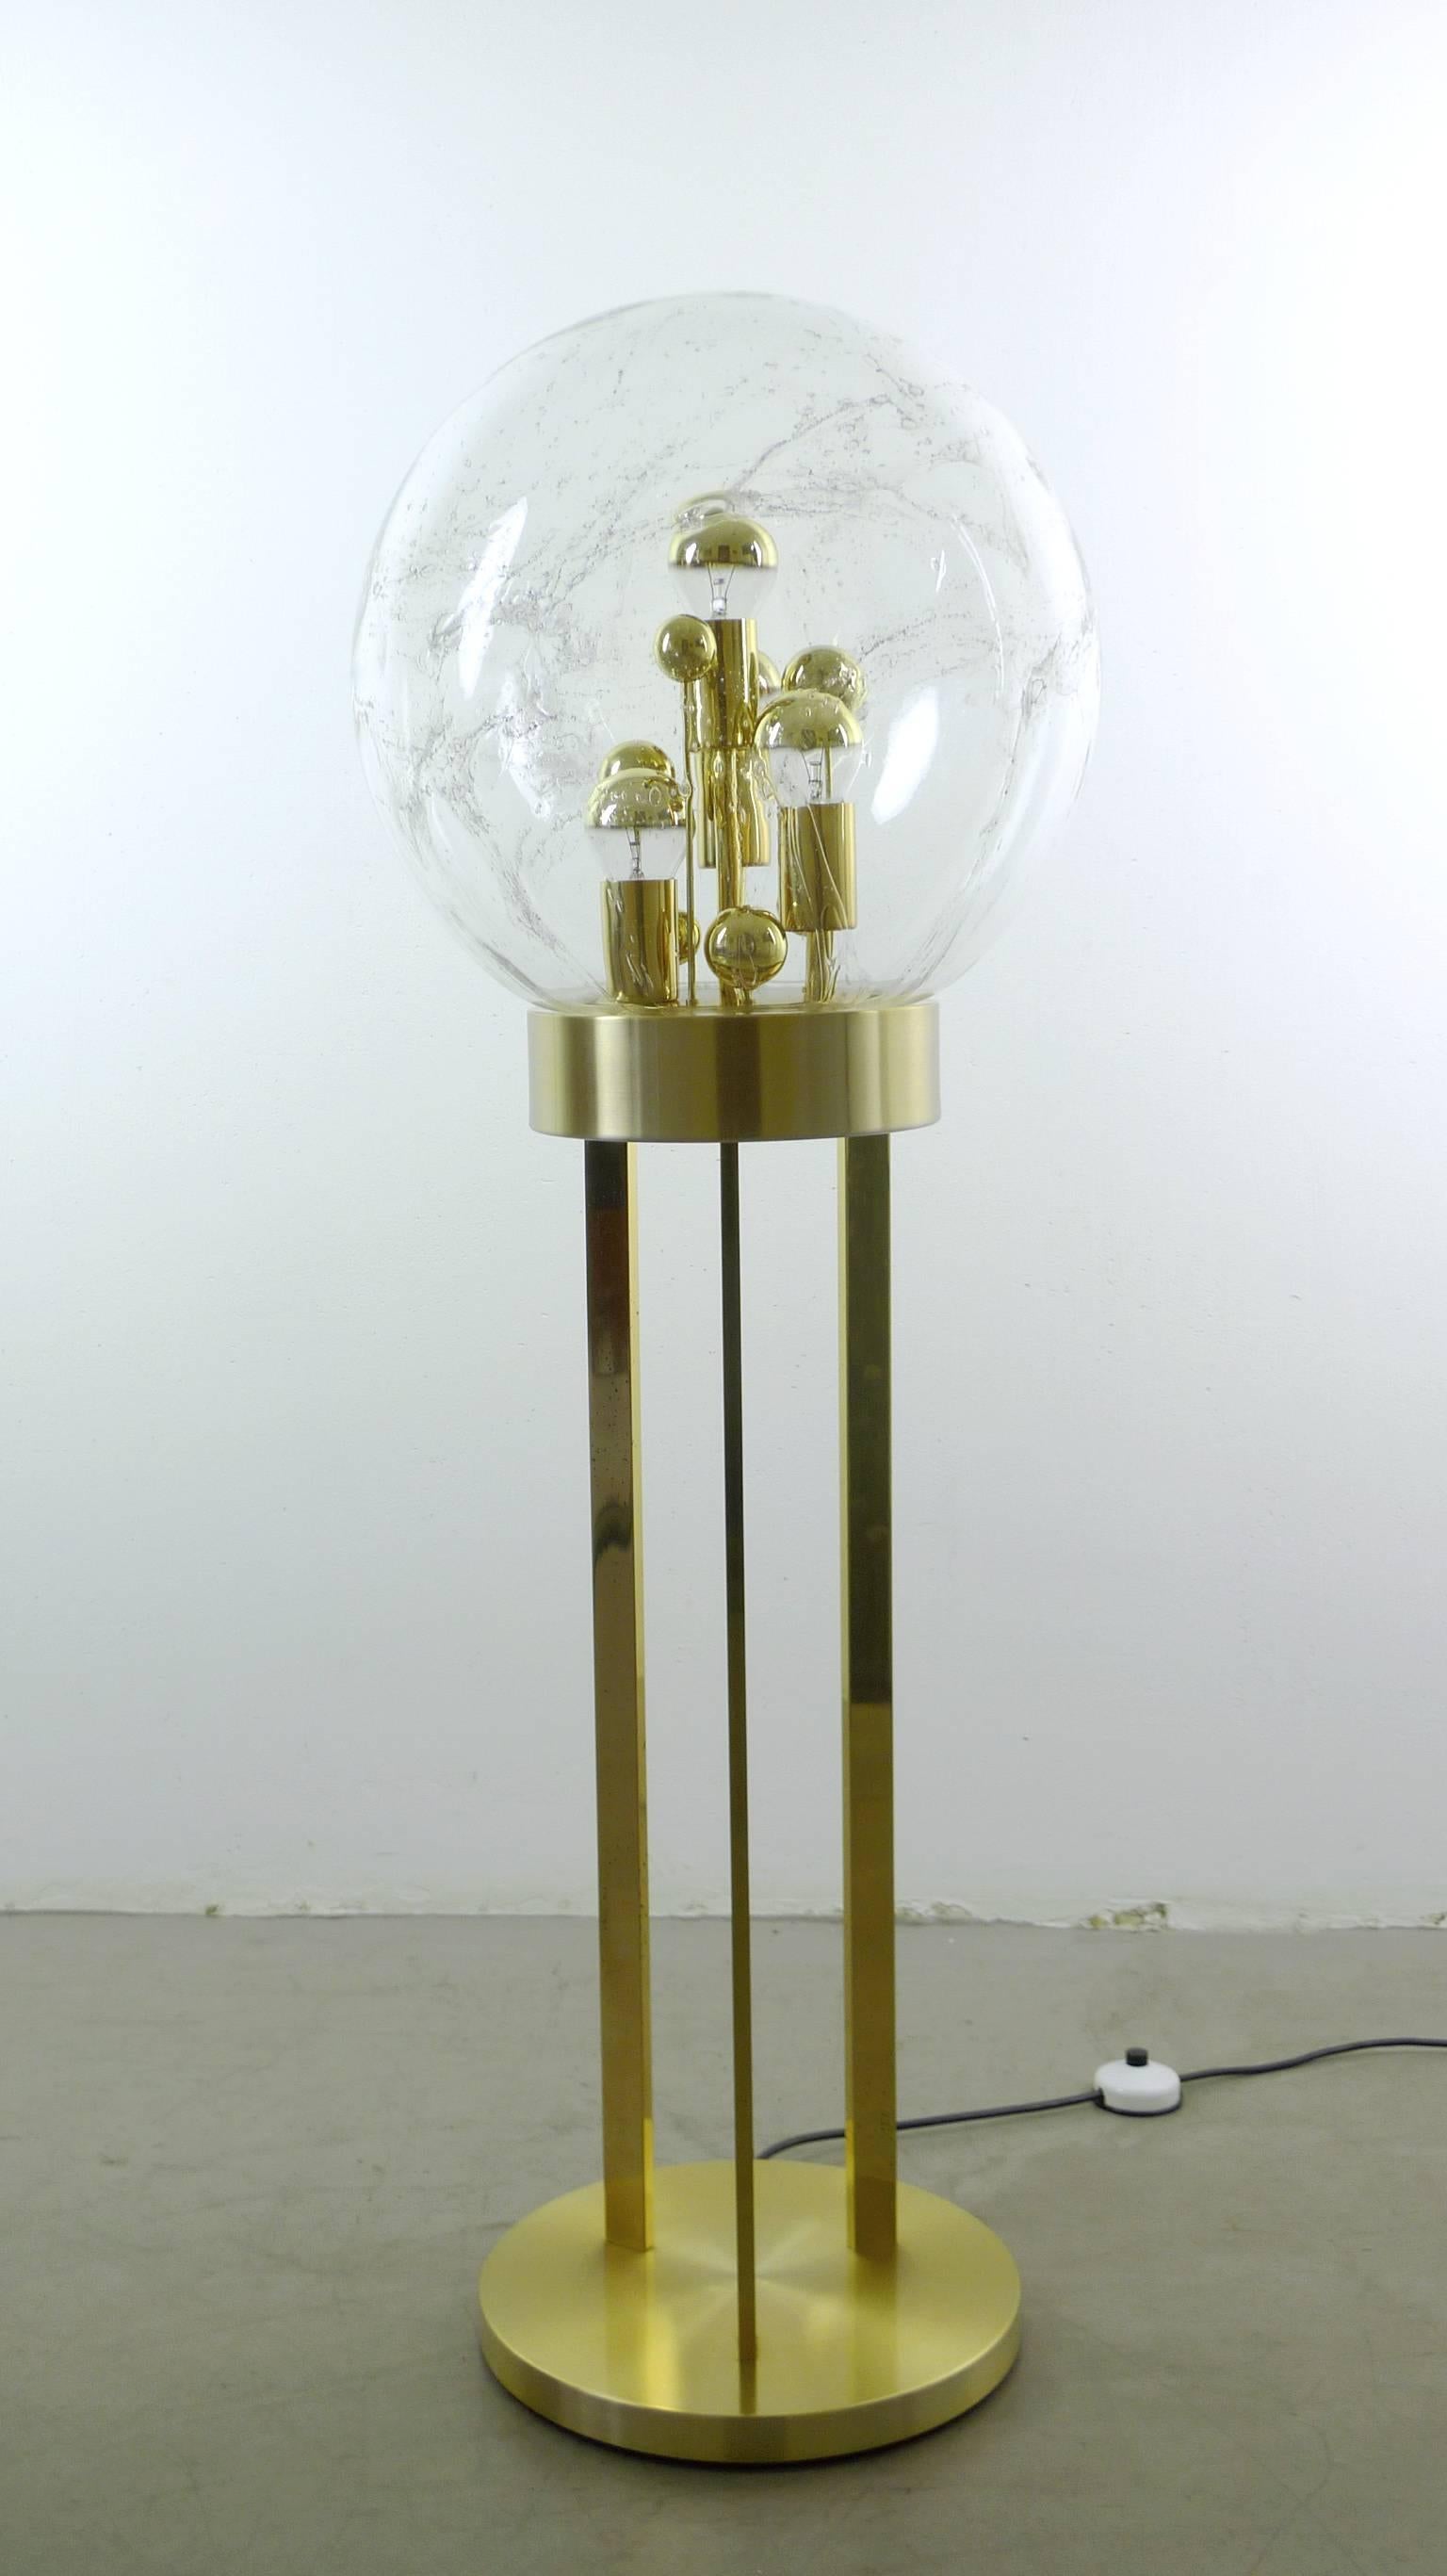 Rare golden floor lamp from the 1960s produced by the German manufacturer Doria.
Three bars holding a large glass globe with a diameter of 40 cm. Inside the globe several golden balls standing like mushrooms in varying heights. Four of them are